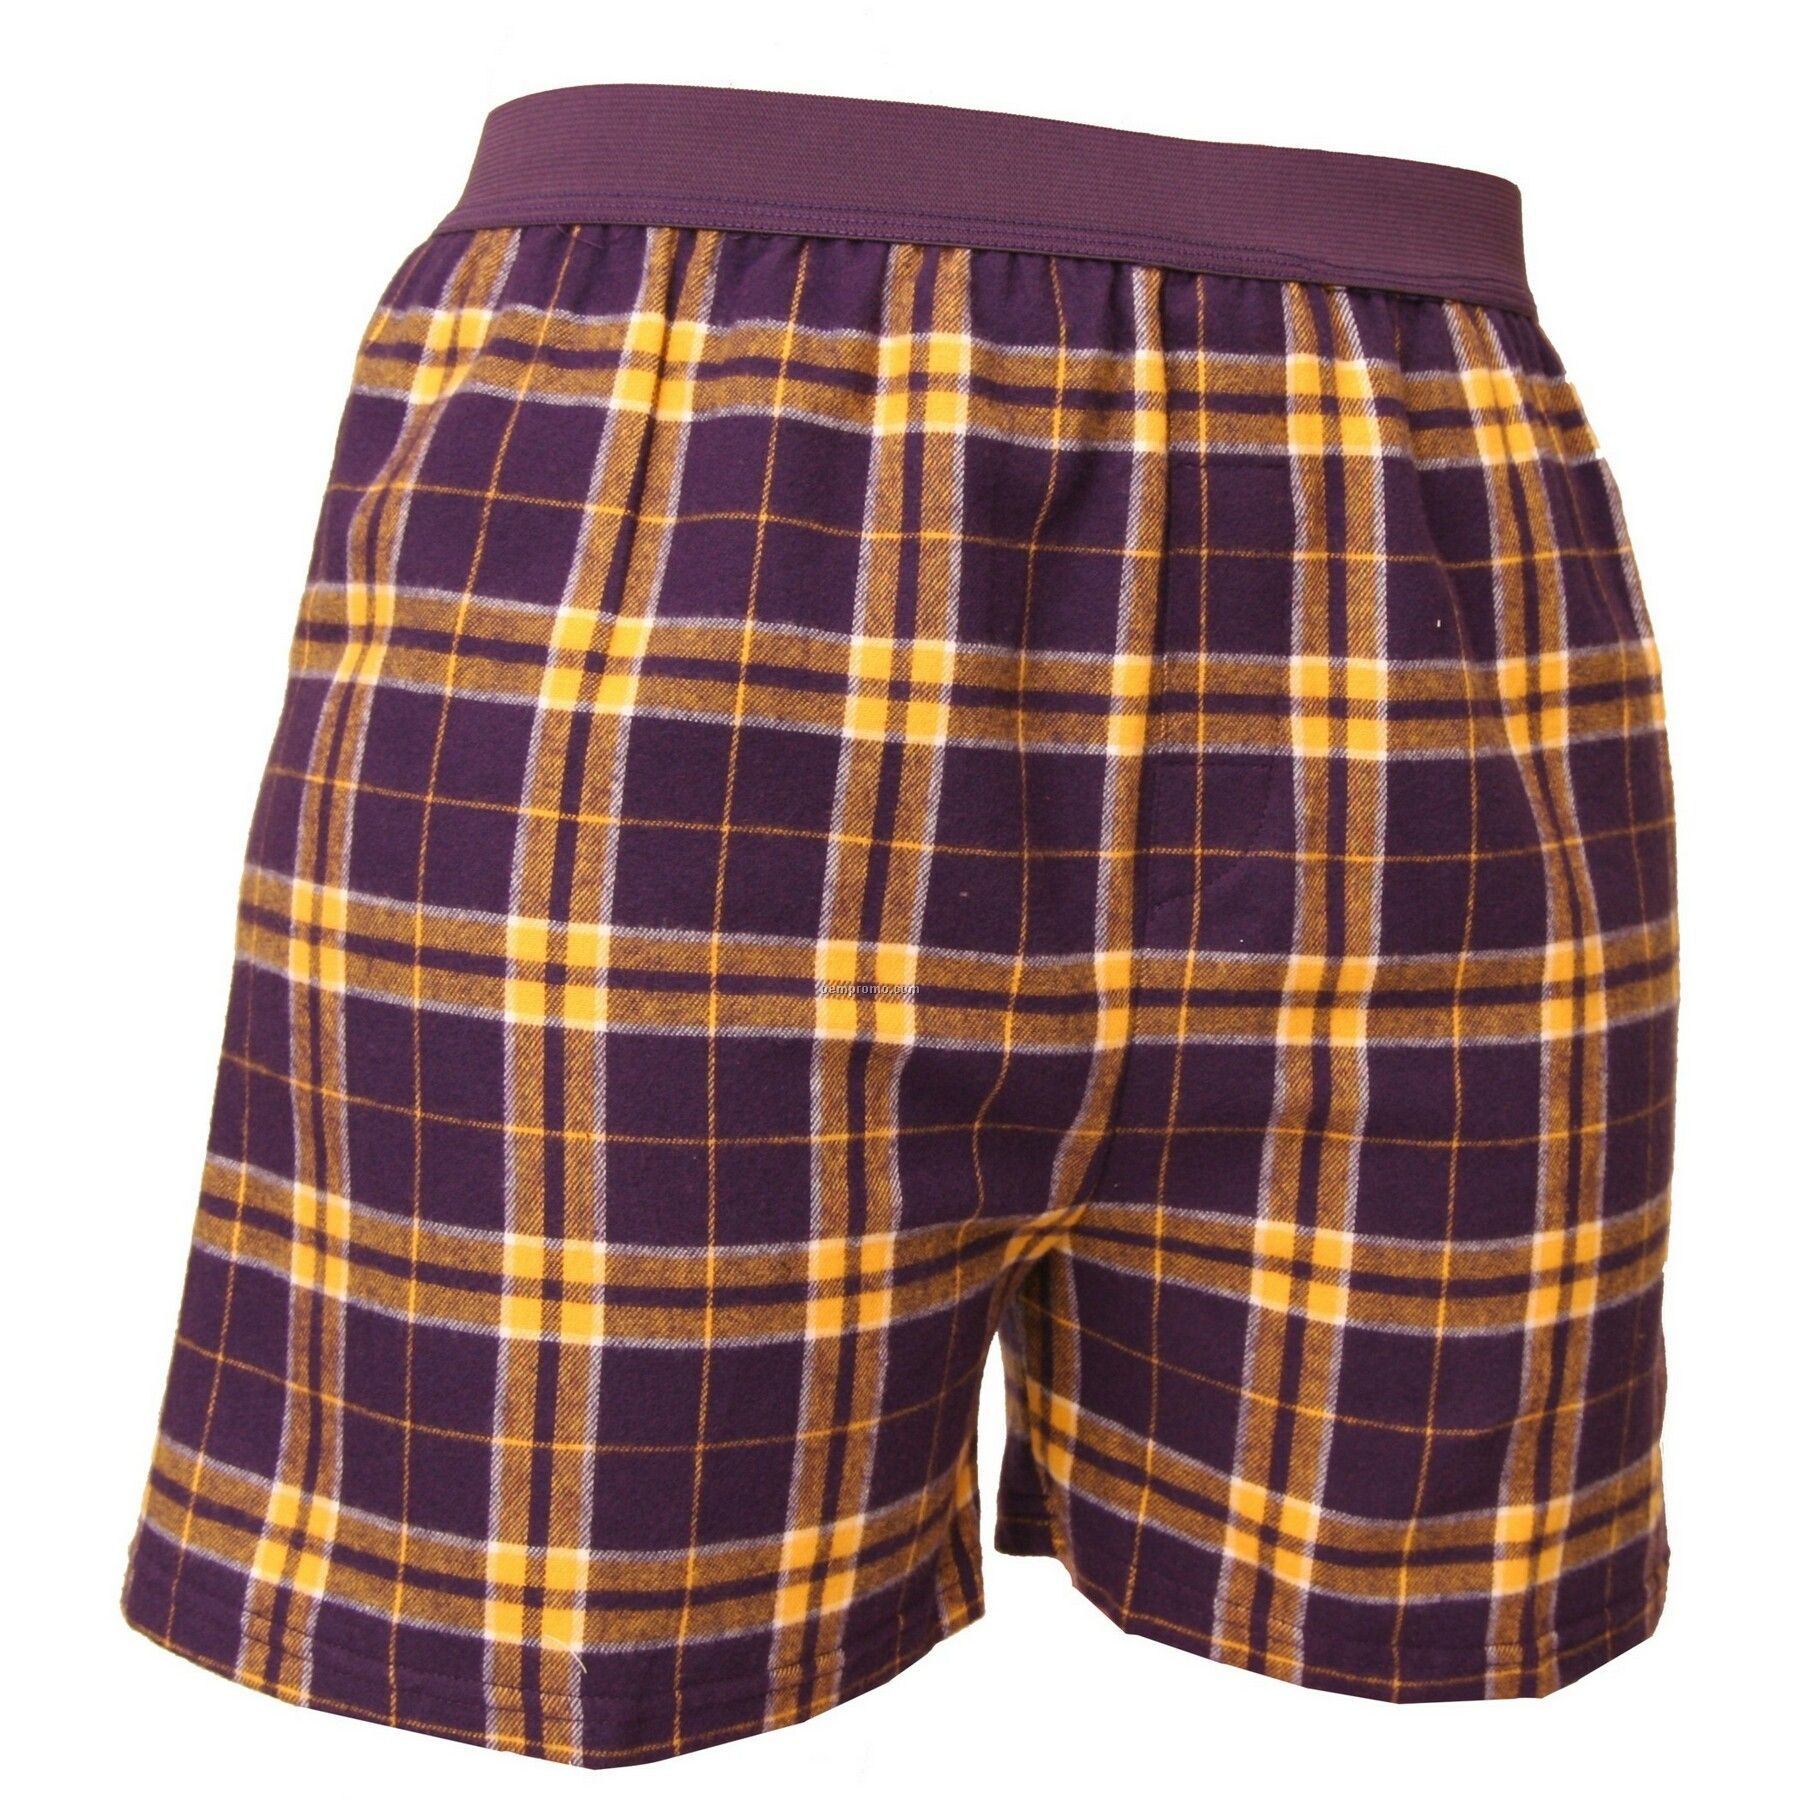 Youth Purple/Gold Plaid Classic Boxer Short